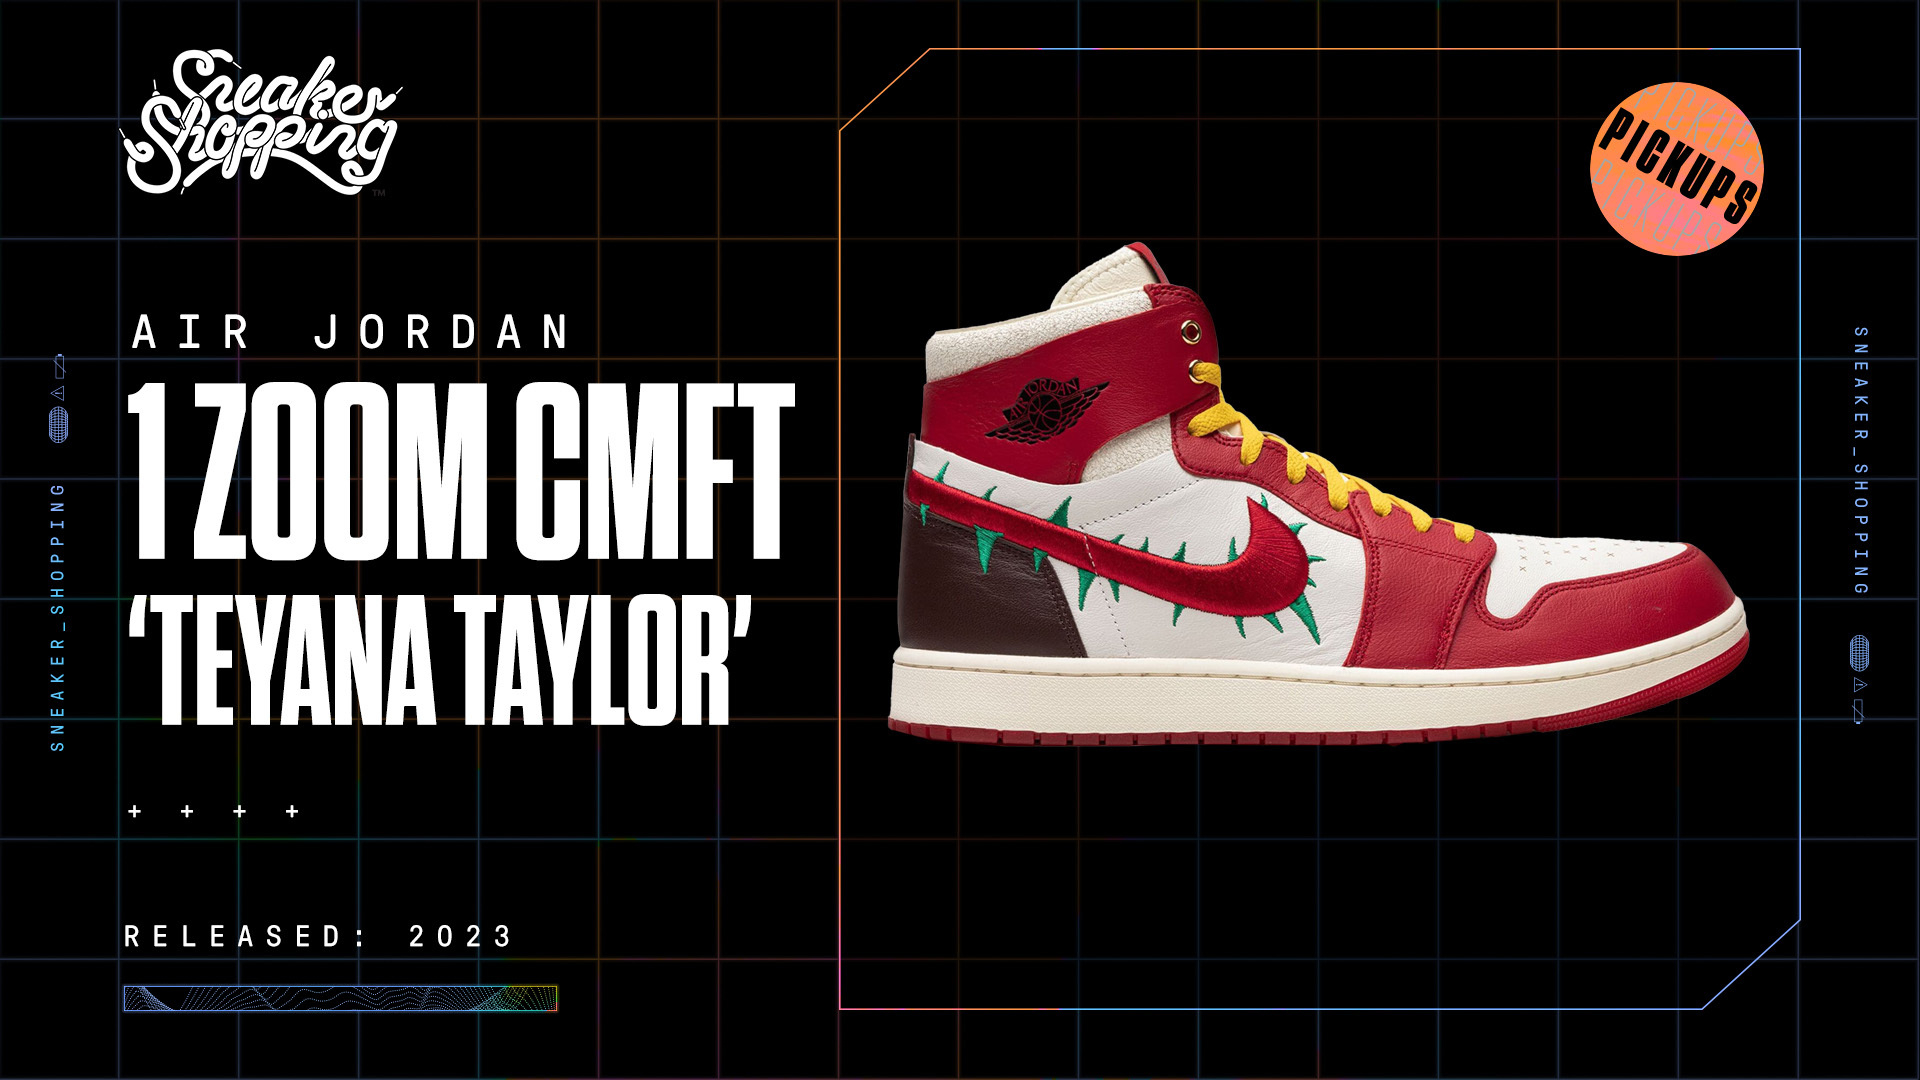 Air Jordan 1 Zoom CMFT &#x27;Teyana Taylor&#x27; sneaker with a red, white, and yellow design, released in 2023. Image from Sneaker Shopping&#x27;s Pickups